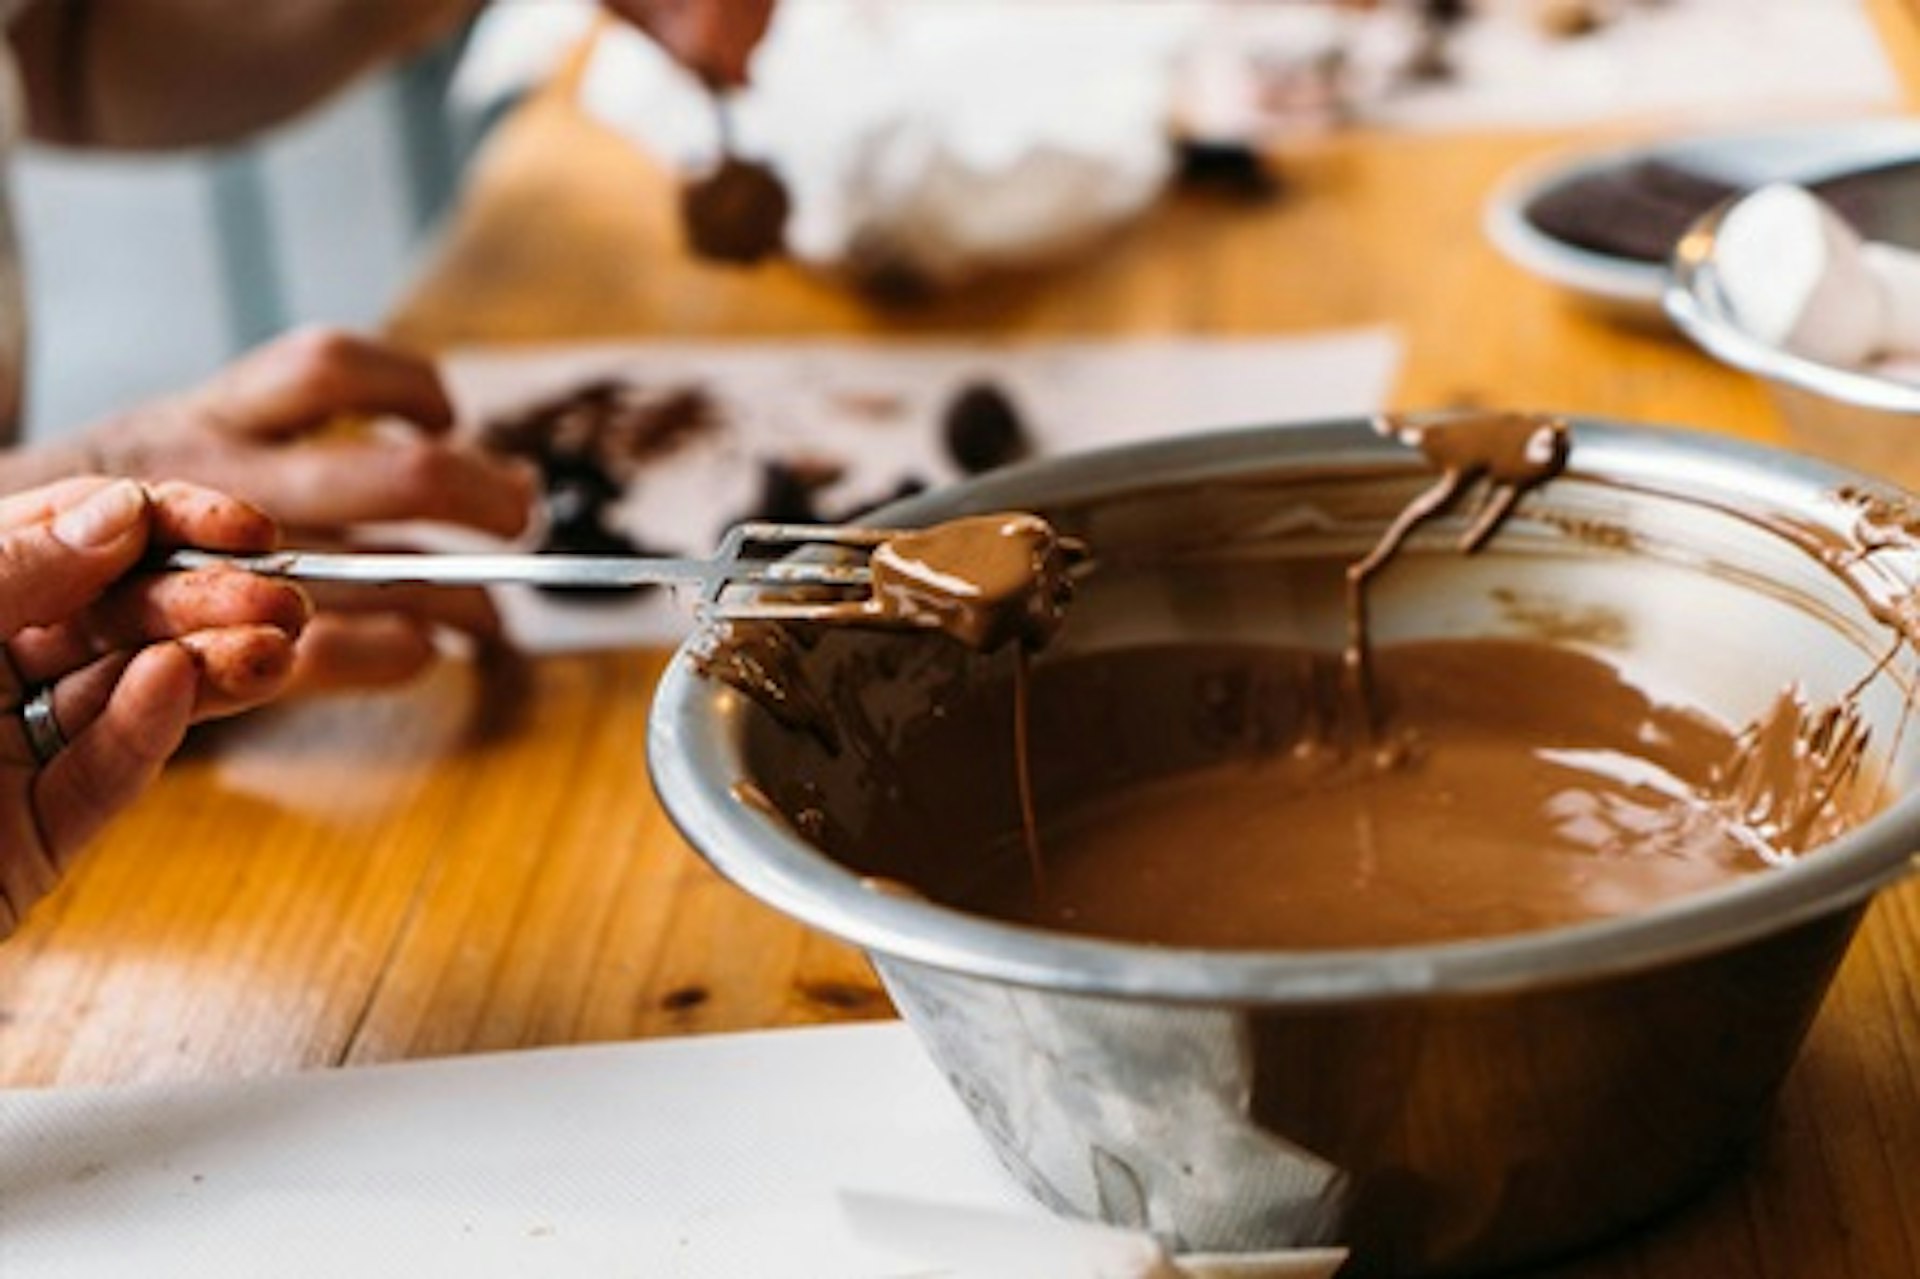 Luxury Chocolate Making Workshop Including Martini and Bubbly for Two with My Chocolate 4